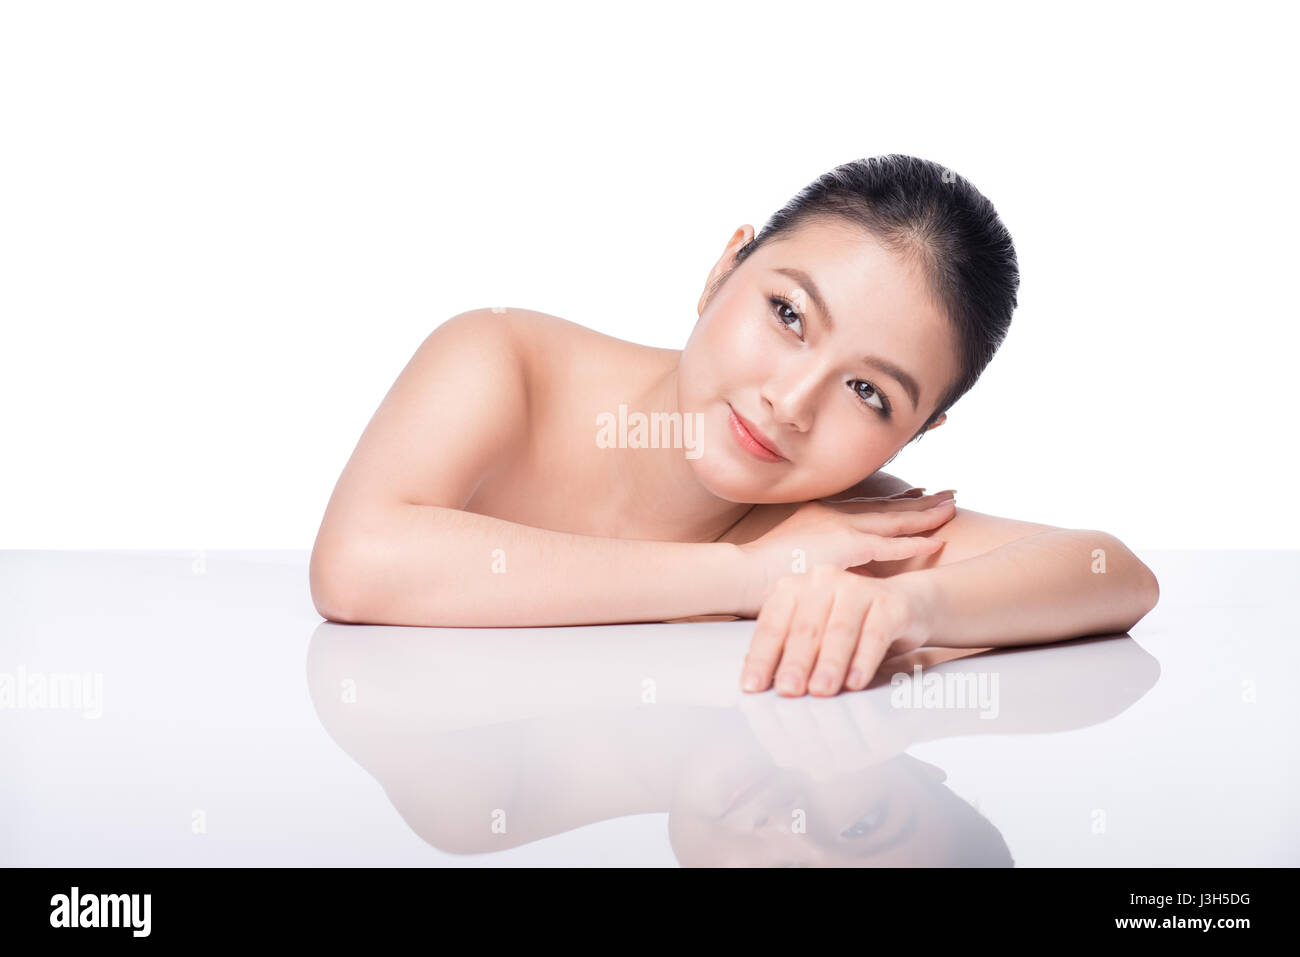 Youth and Skin Care Concept. Beauty Spa Asian Woman with perfect skin Portrait. Stock Photo